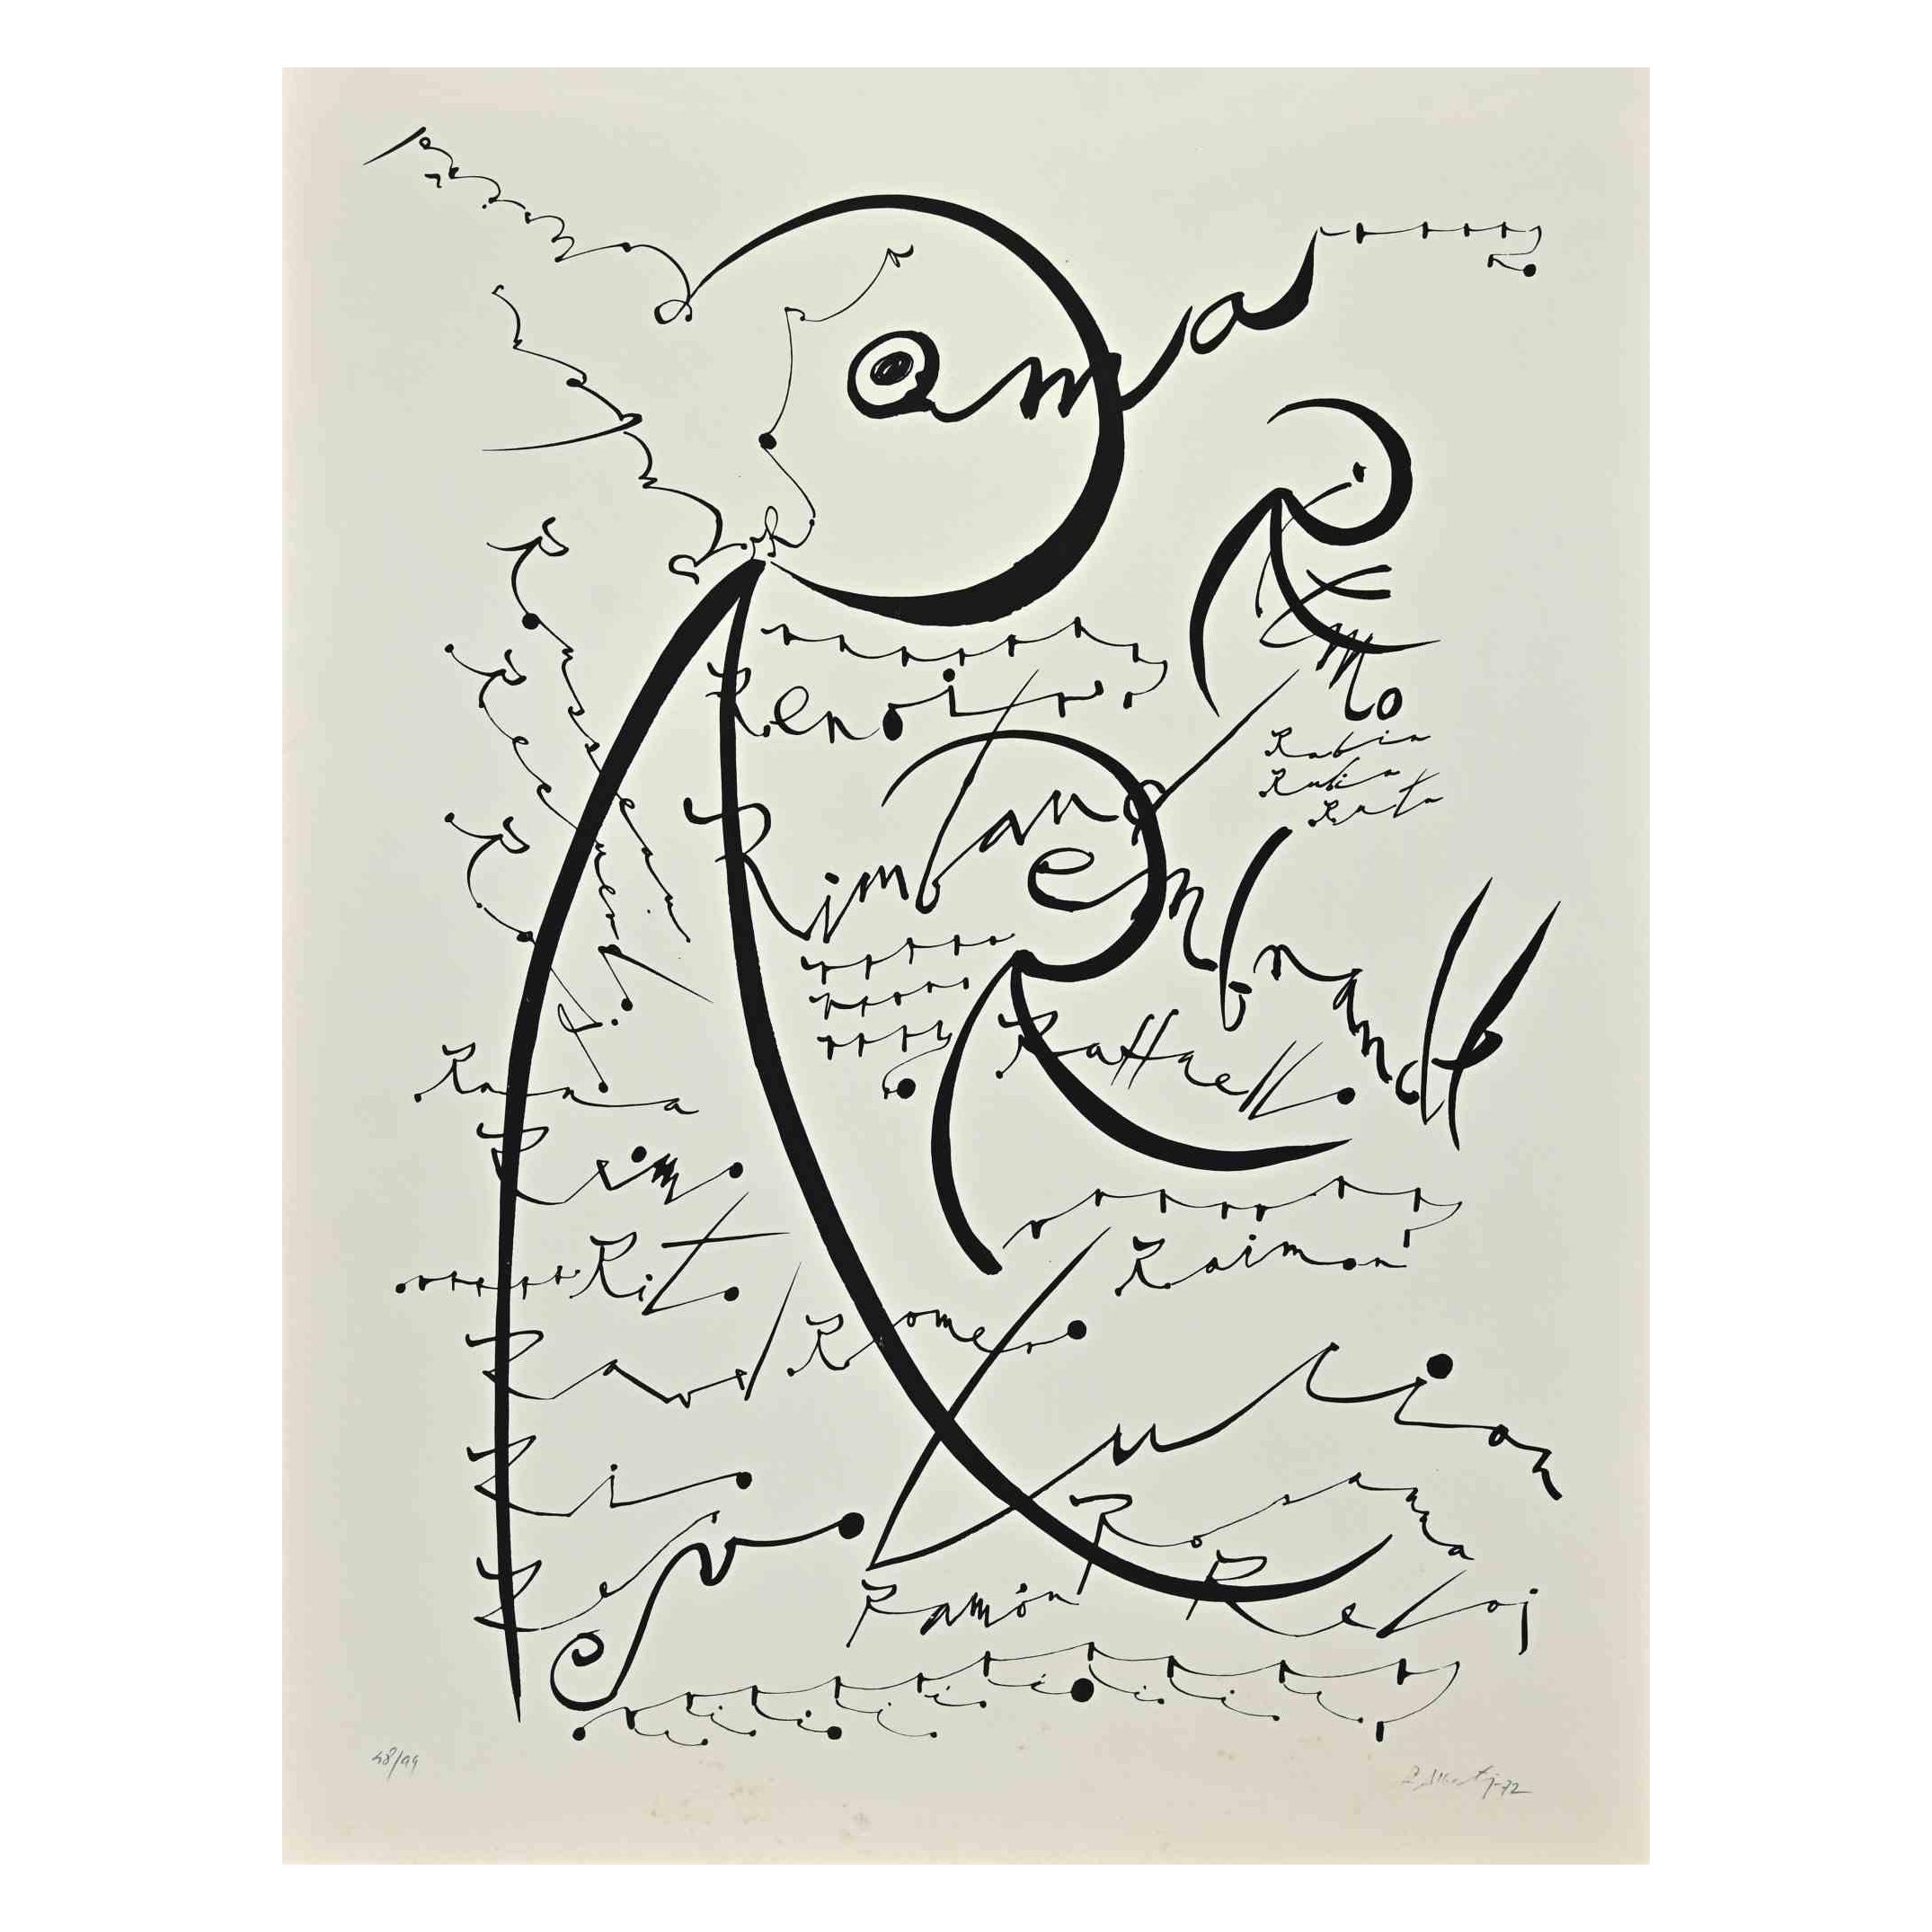 Letter R from Alphabet series is an original lithograph realized by Rafael Alberti in 1972.

Hand-signed and dated on the lower margin.

Numbered on the lower margin. Edition 48/99

Good conditions

The artwork represents alphabet letter Z, with a